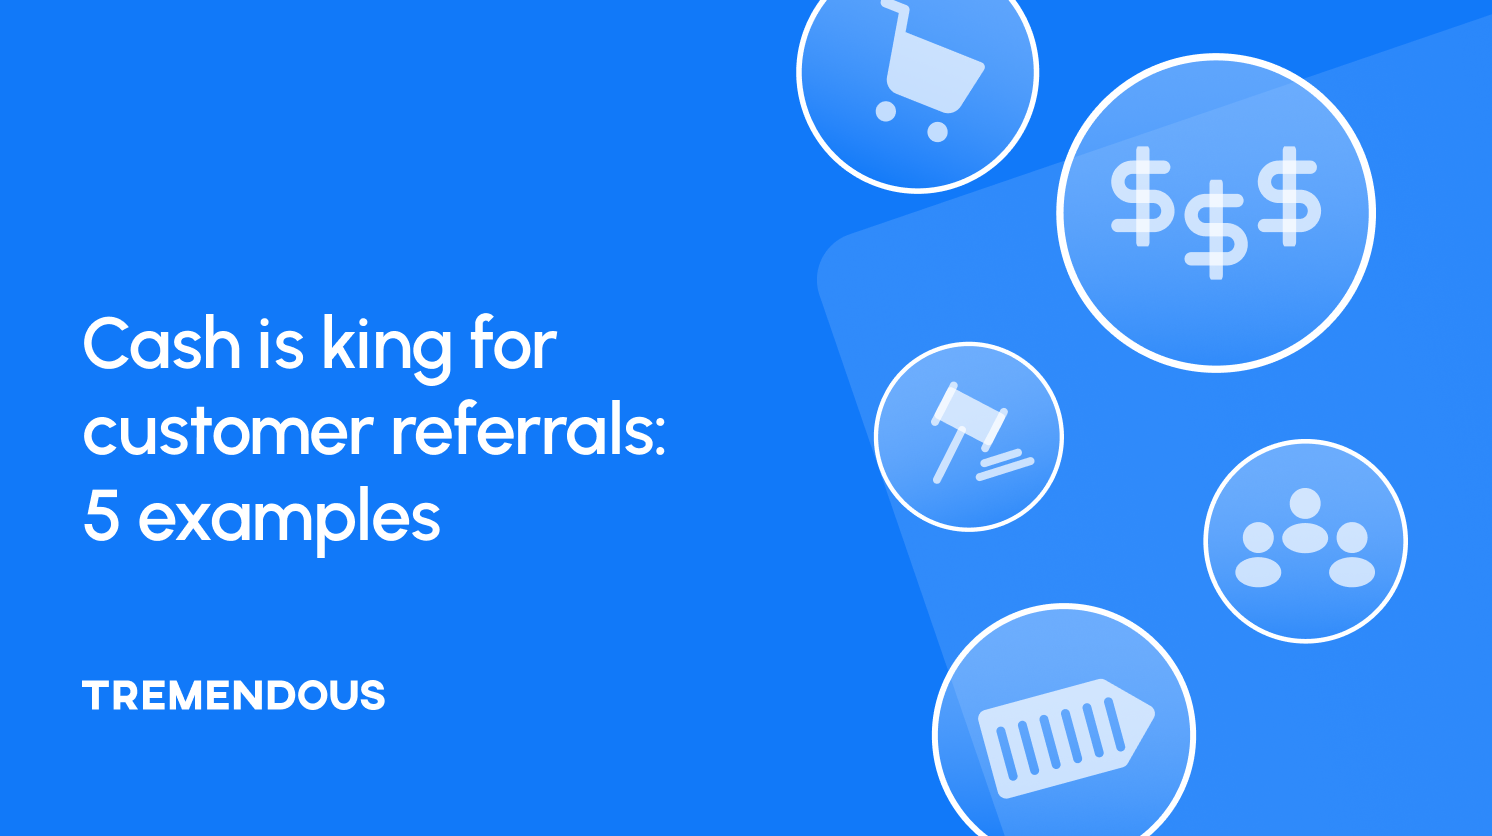 Cash is king for customer referrals: 5 examples